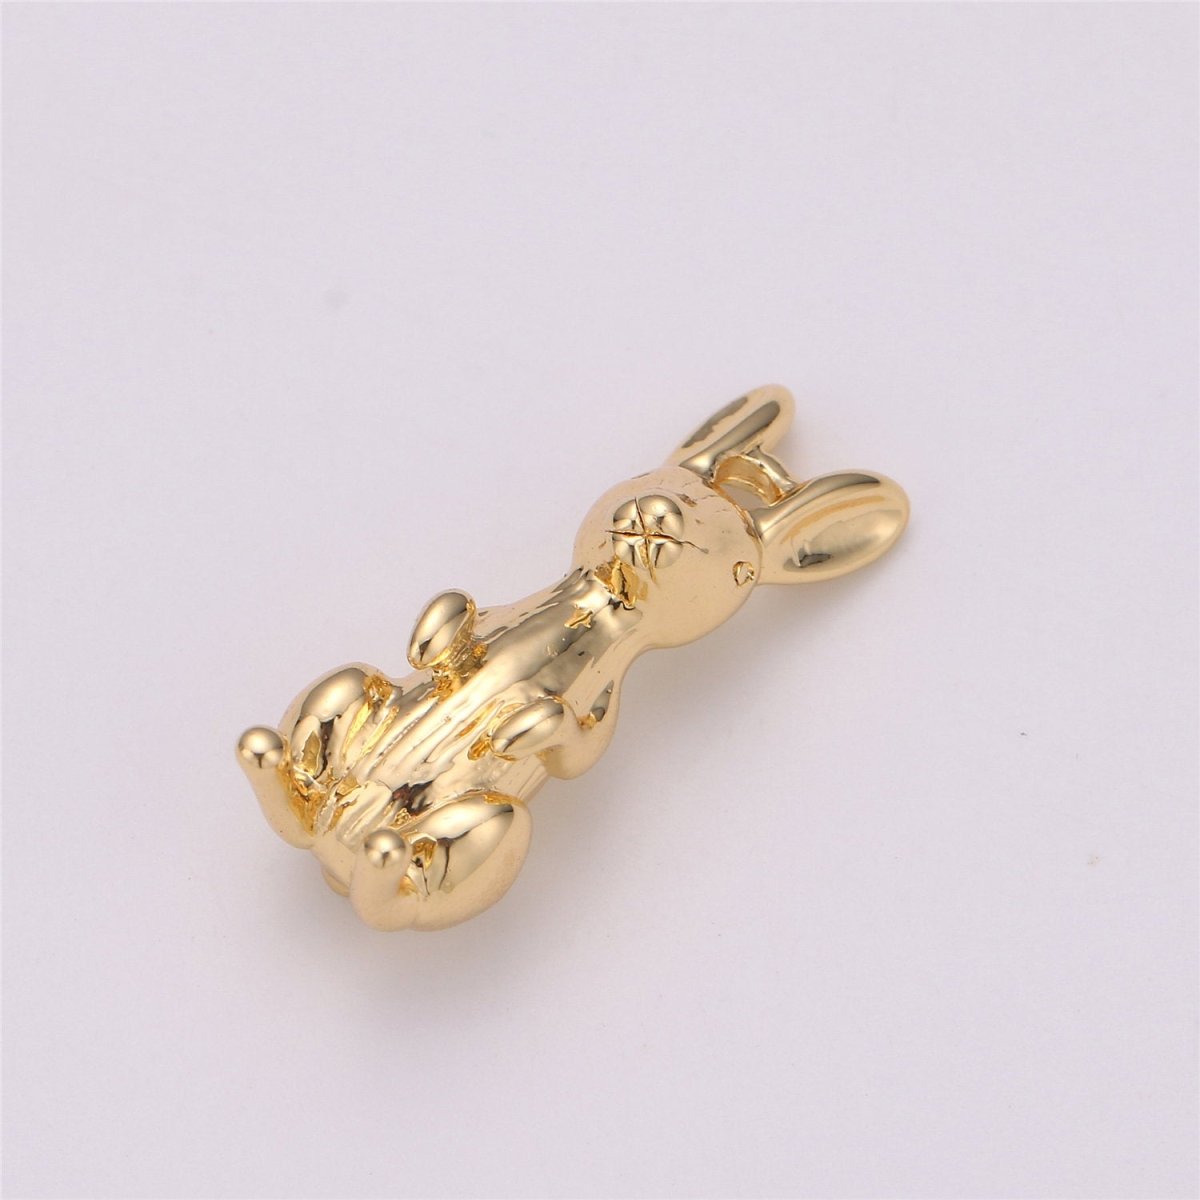 Bunny Charm, Rabbit Charm, Easter Charm, 3d Animal Charm, Animal Lover, Gold Filled Charm for Jewelry Making Supply C-526 - DLUXCA